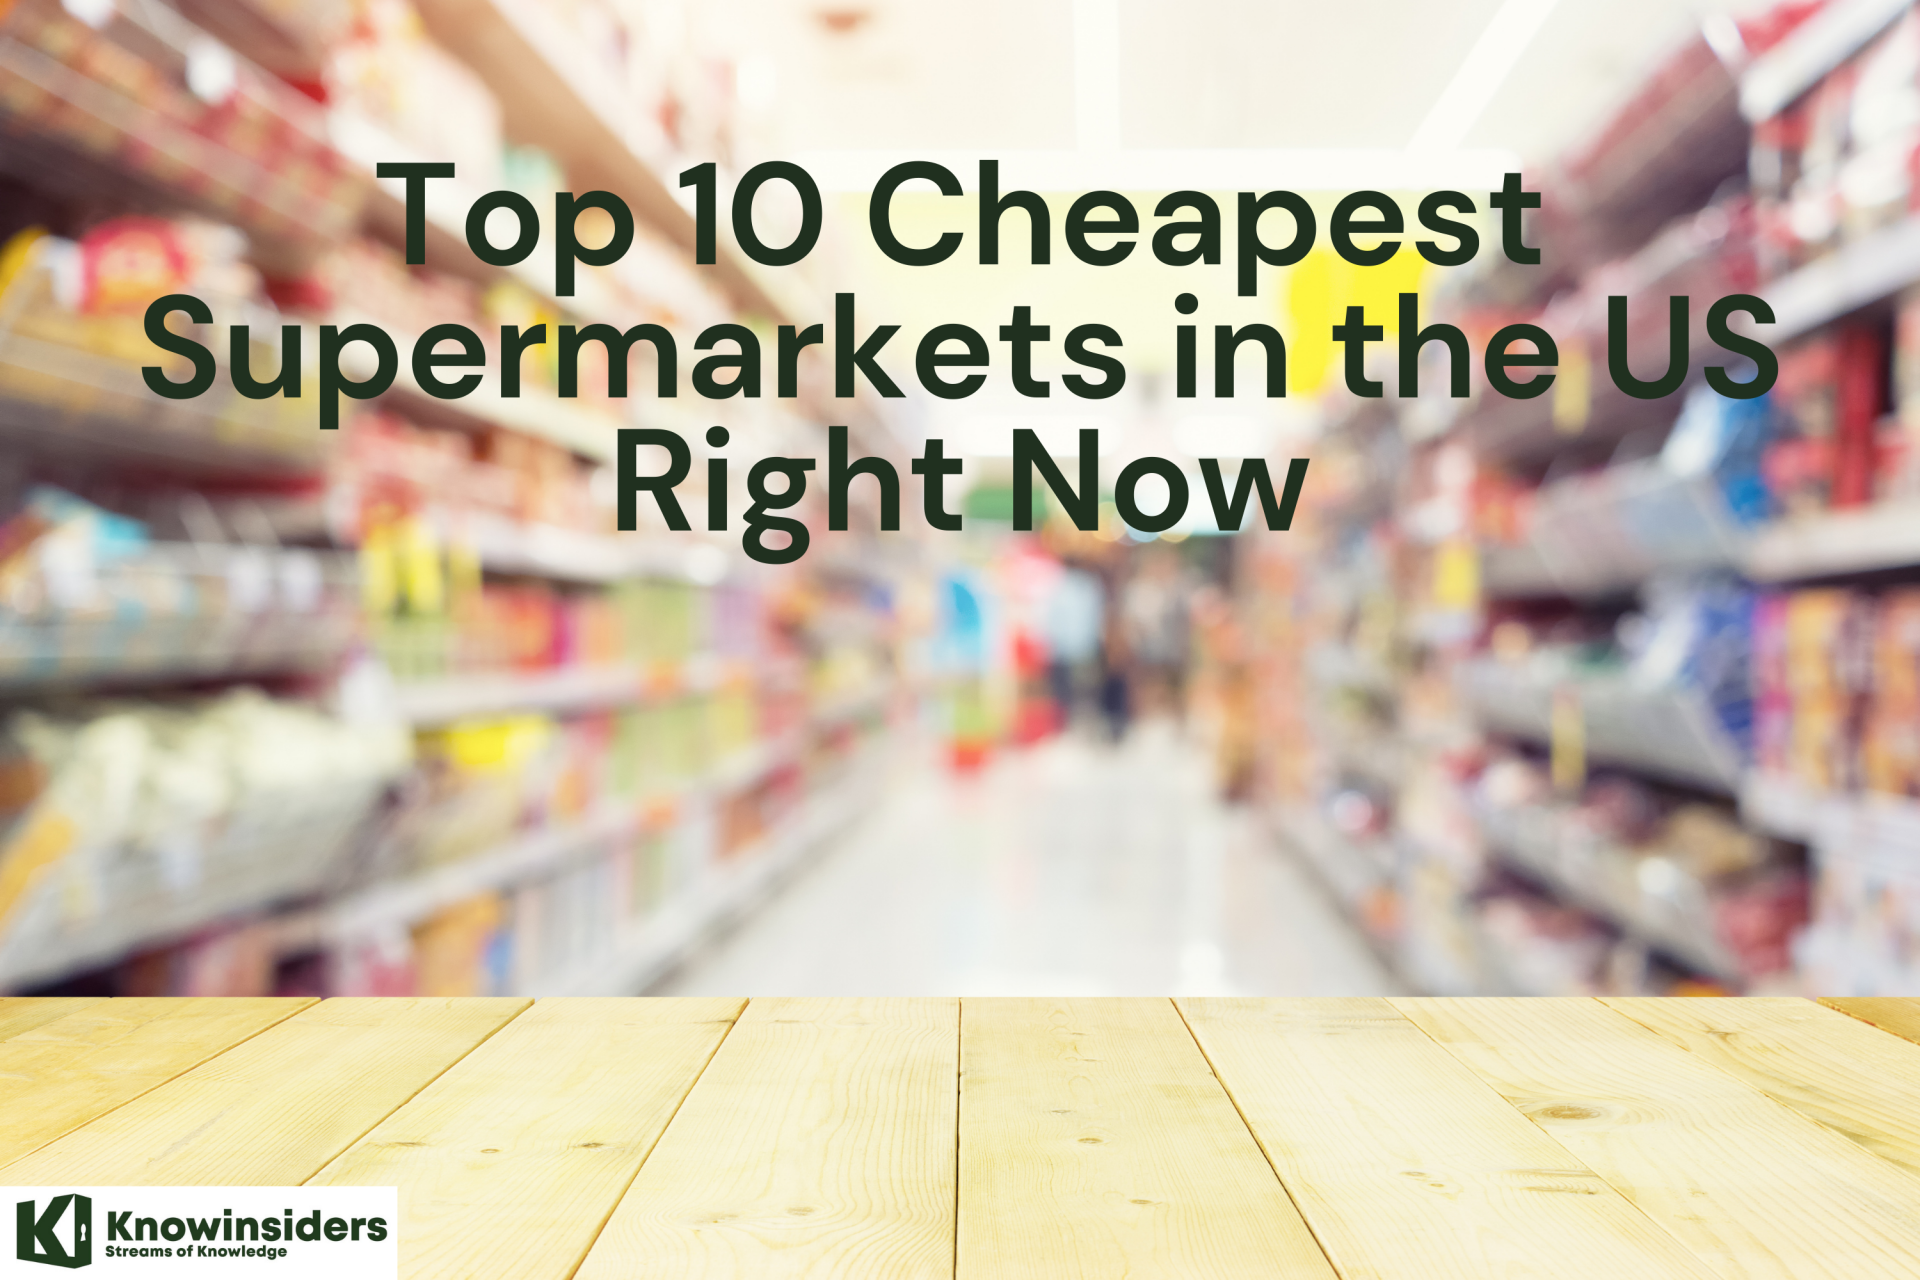 Top 10 Cheapest Supermarkets in the US Right Now